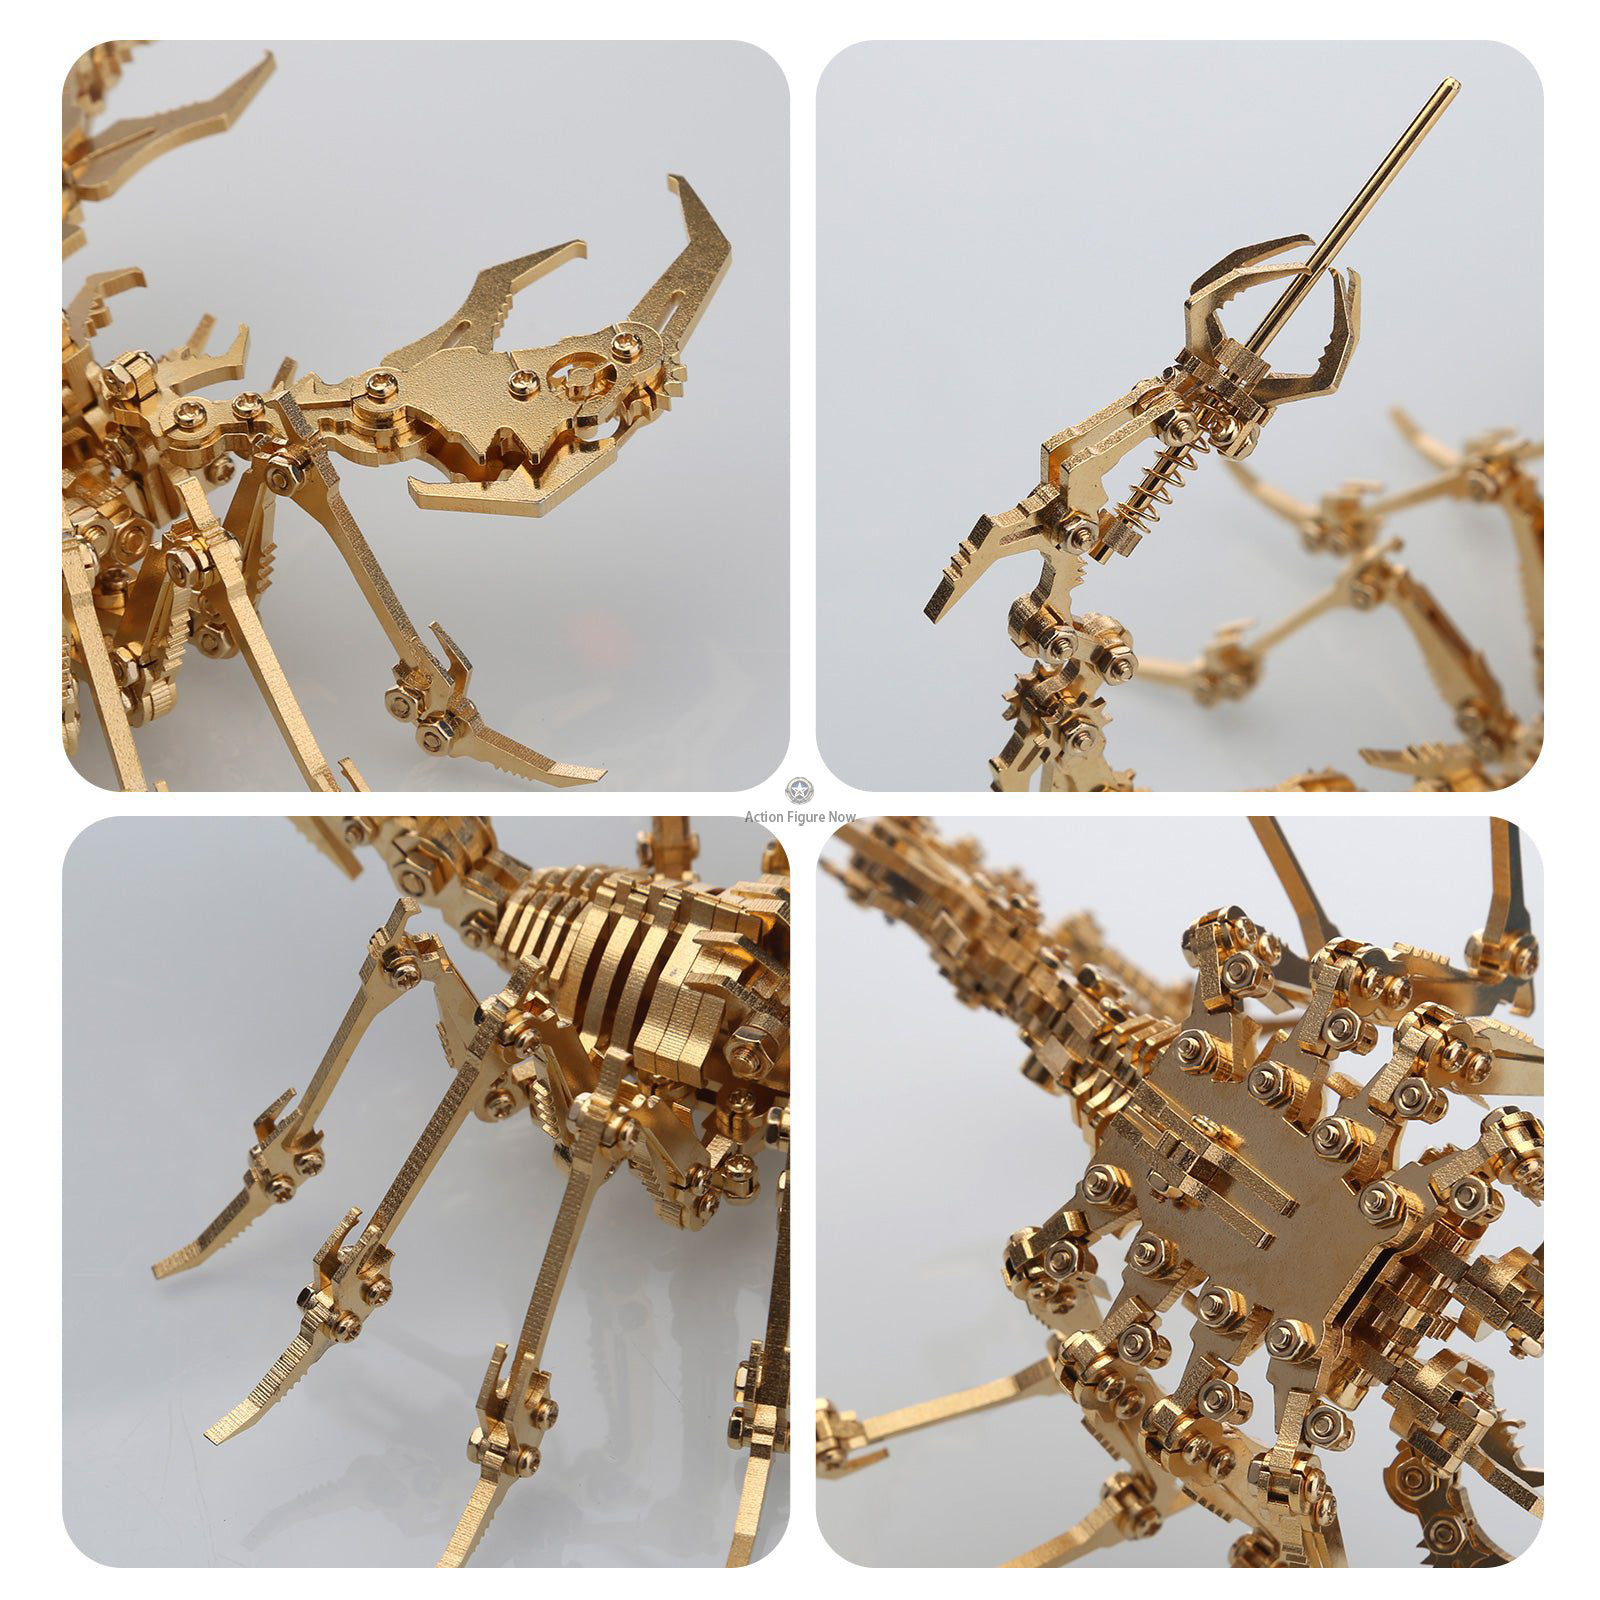 Red 3D Metal Puzzle Scorpion DIY Model Kit for Adults